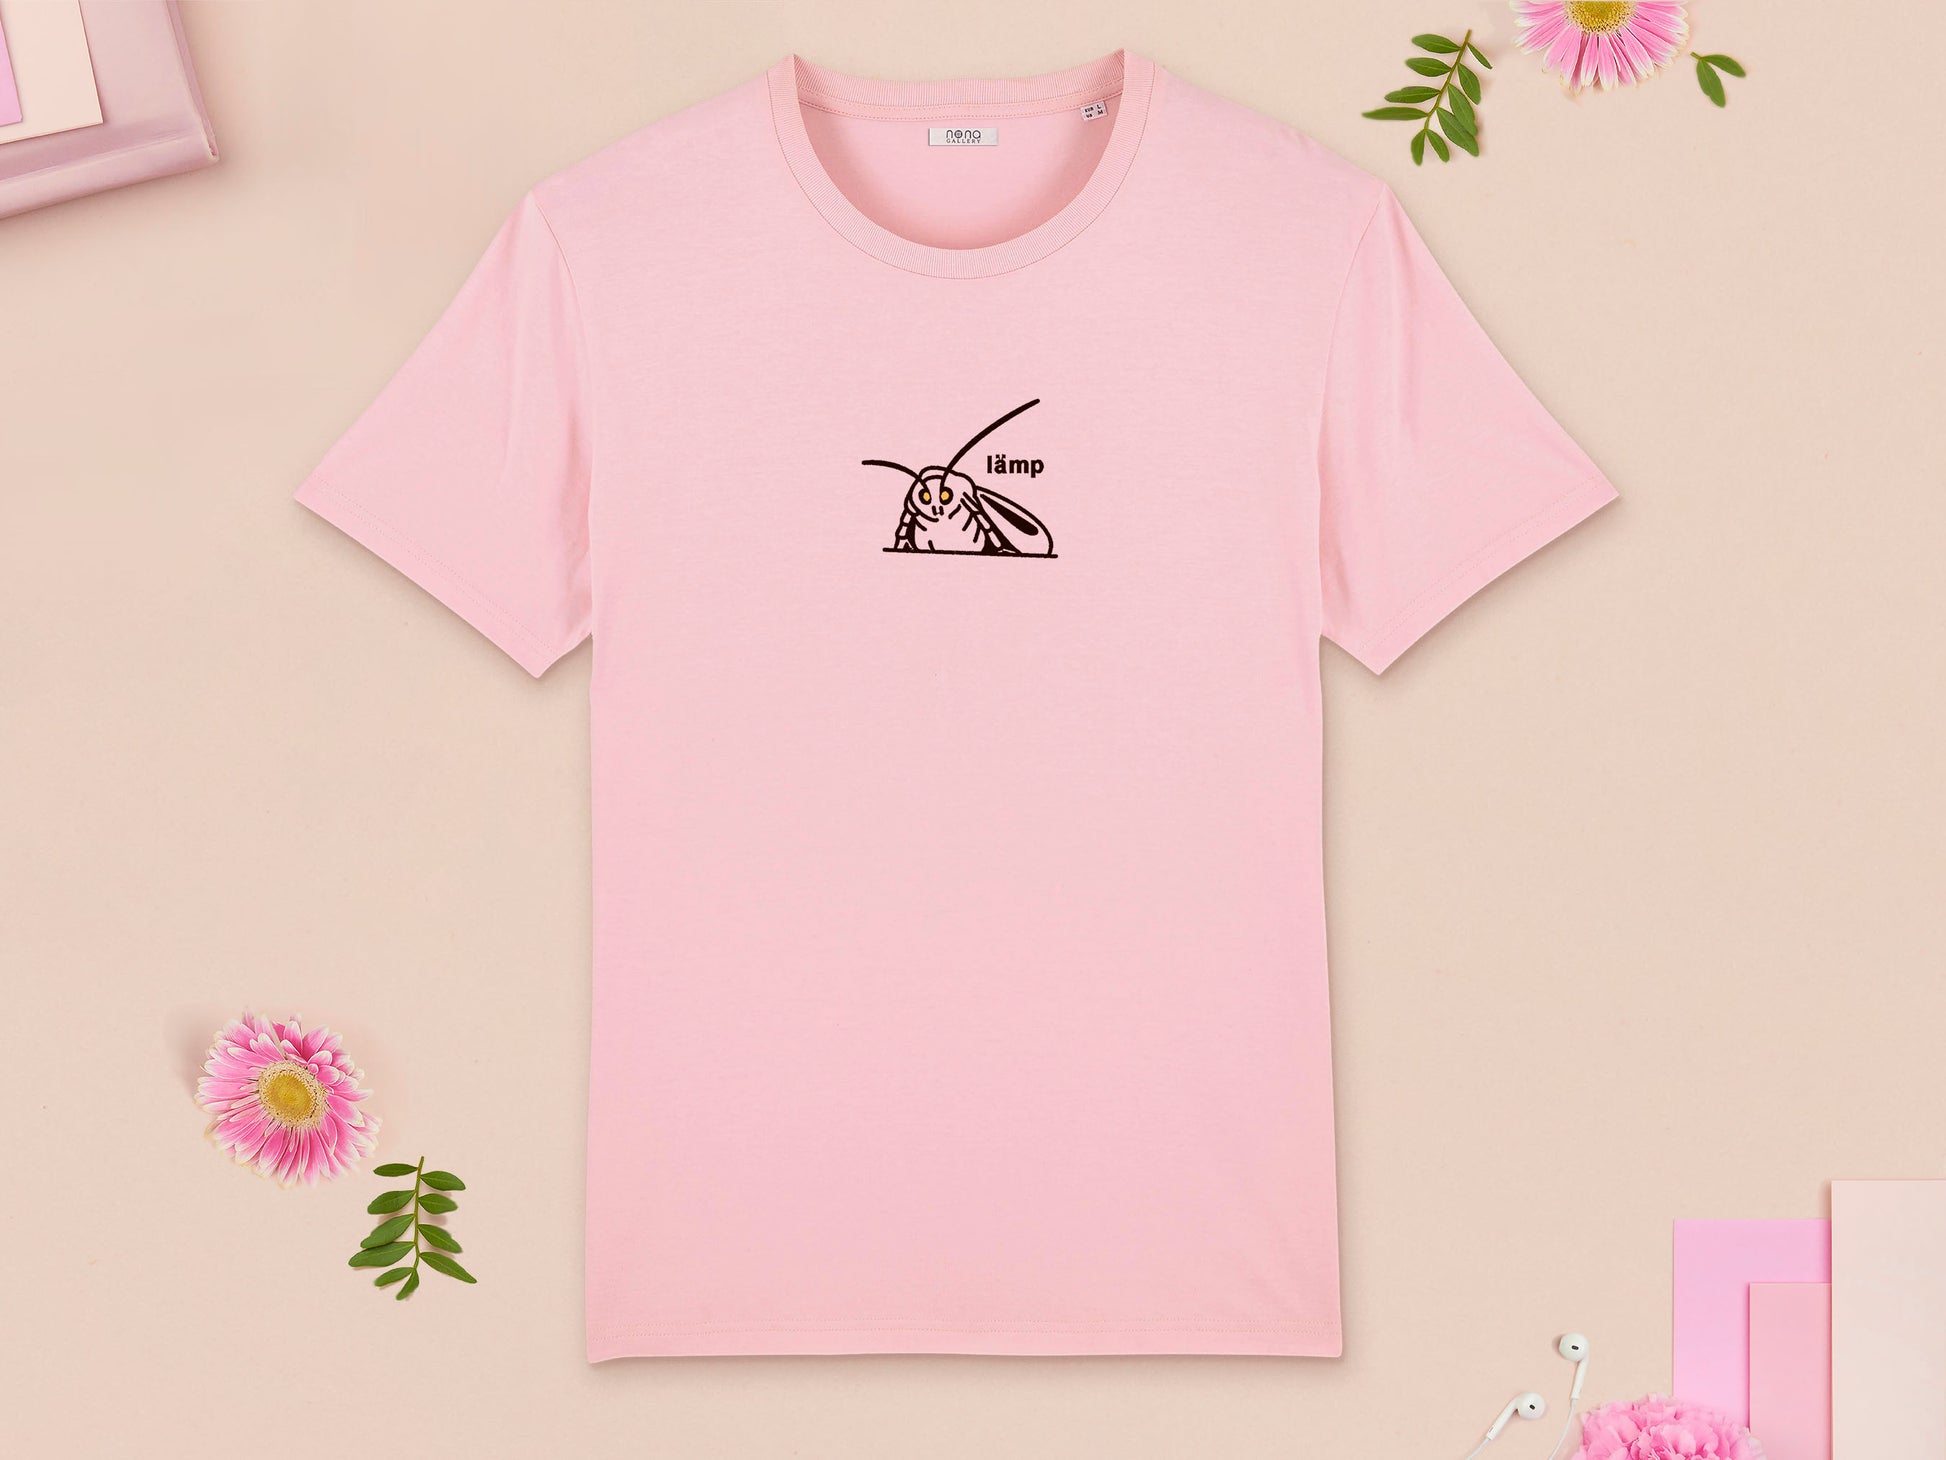 A pink crew neck short sleeve t-shirt, with an embroidered brown thread design of a moth with glowing yellow eyes and the word lämp